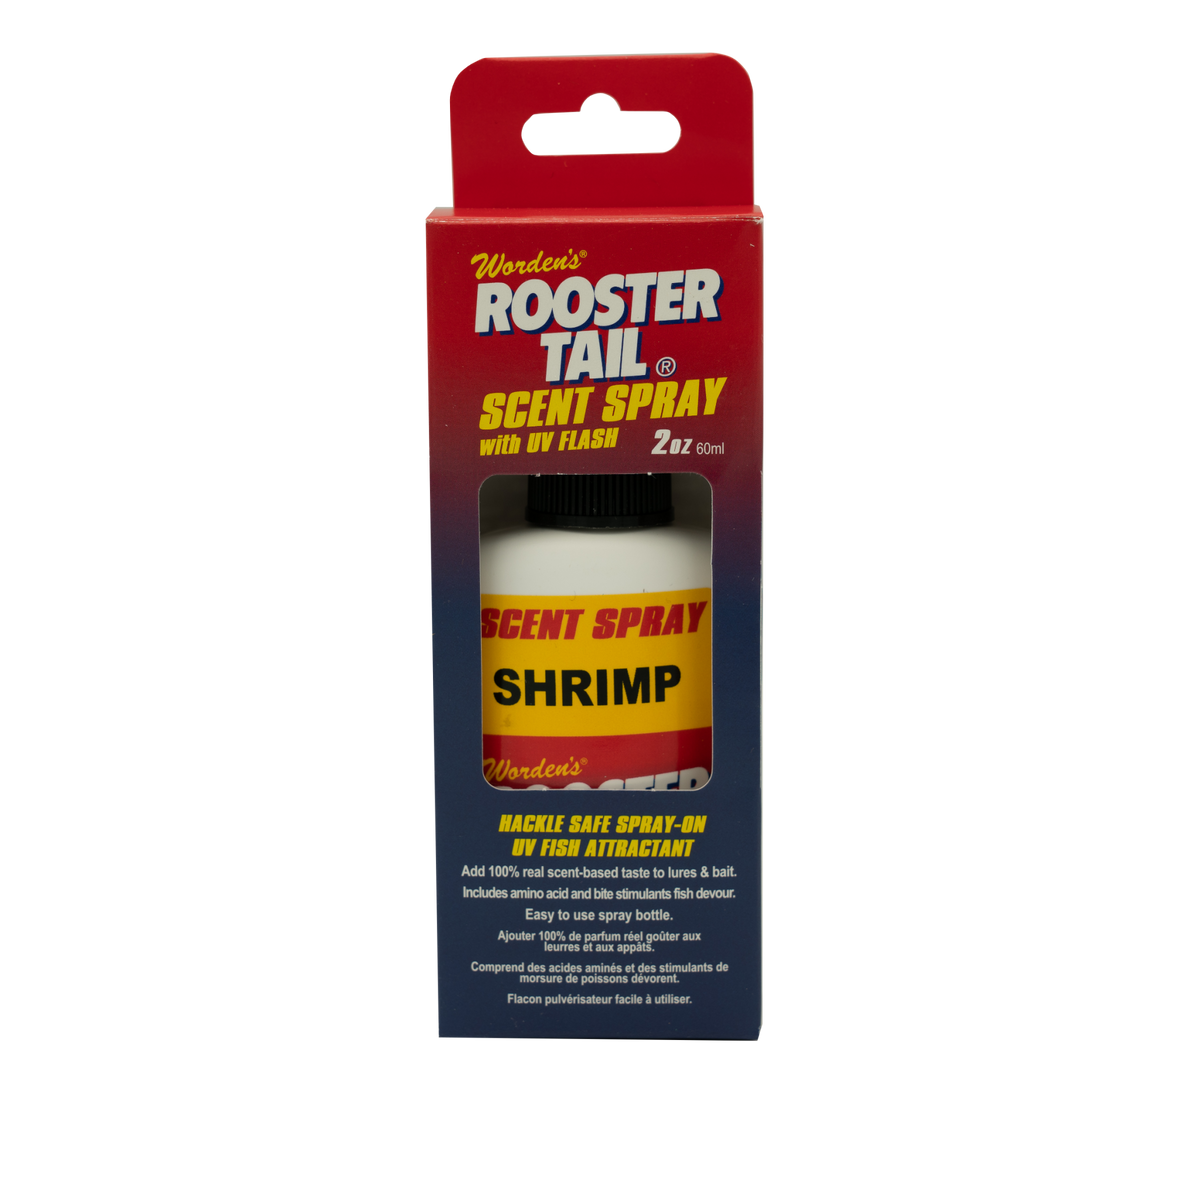 ROOSTER TAIL SHRIMP – Pro-Cure, Inc